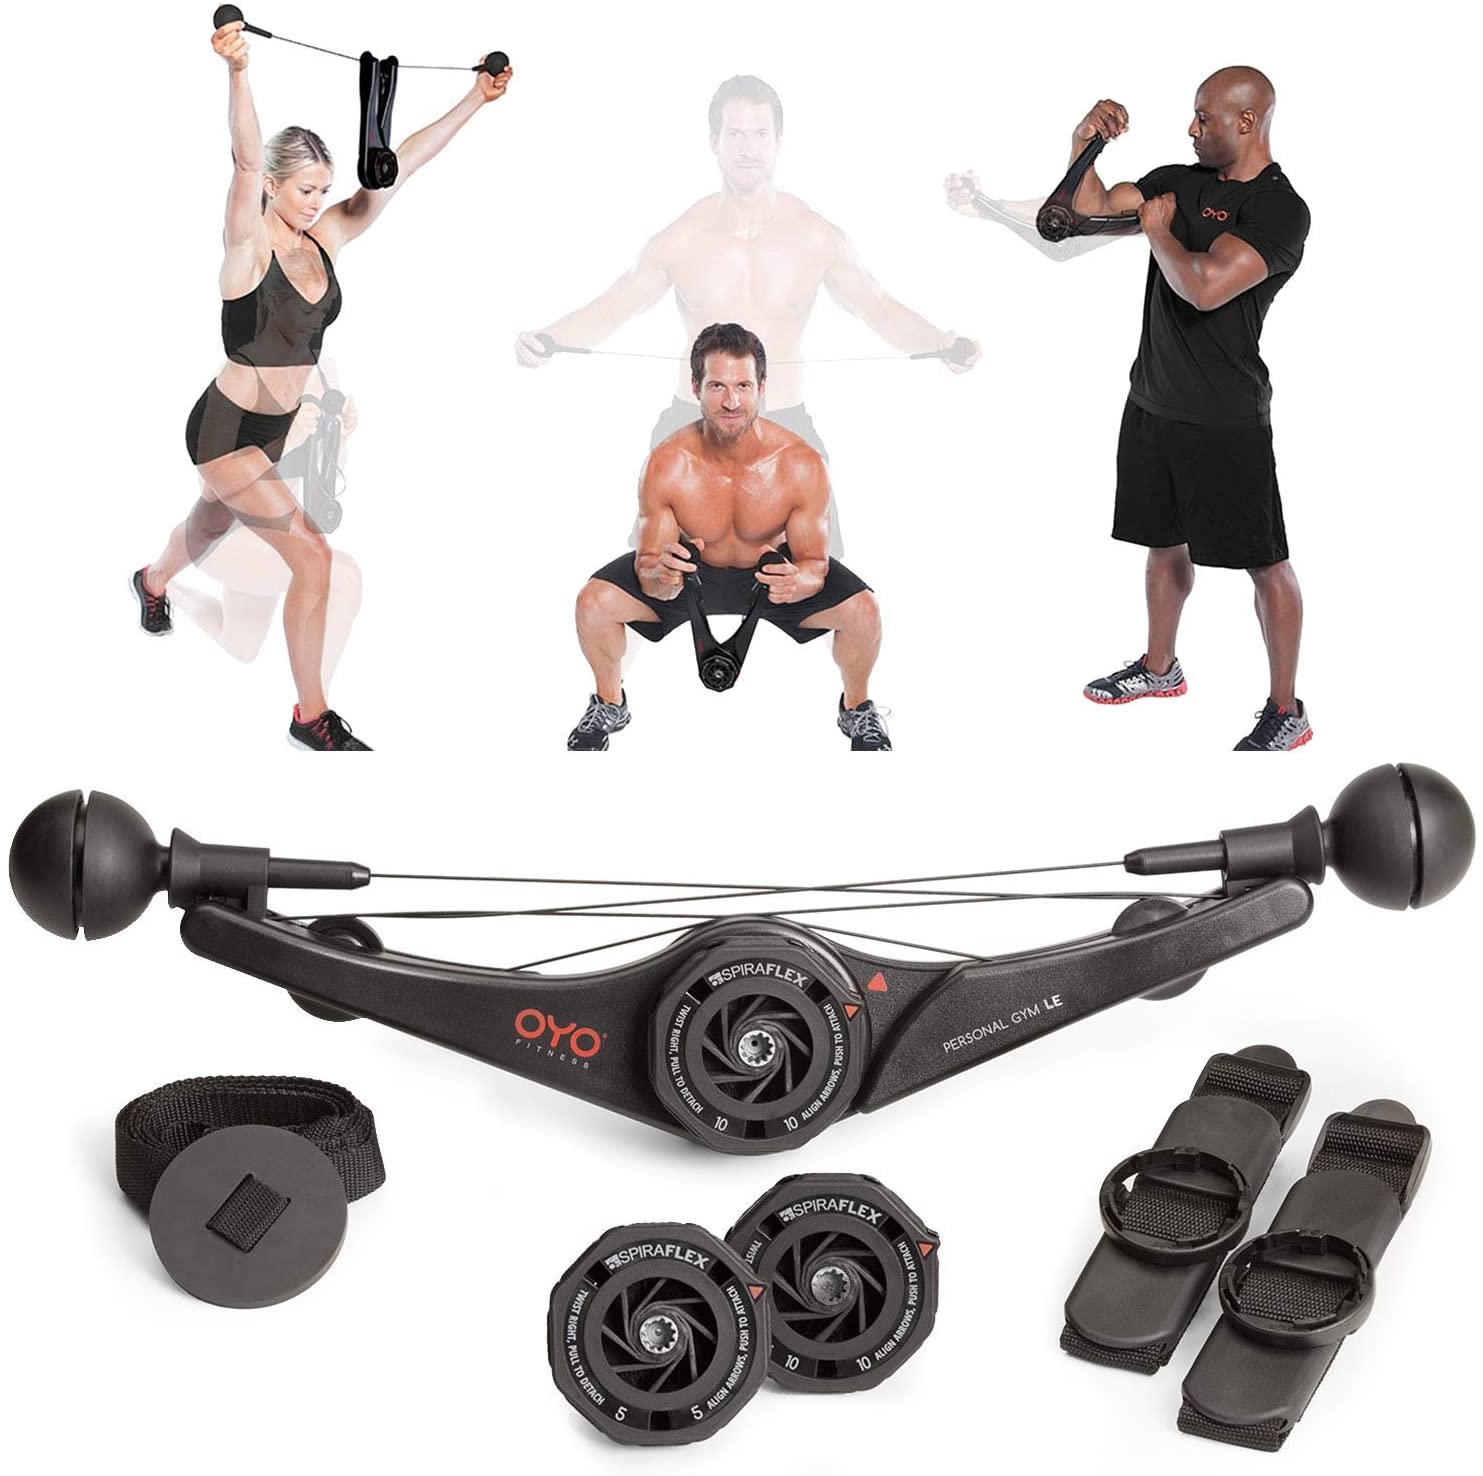 Review of OYO Personal Gym - Full Body Portable Gym Equipment Set